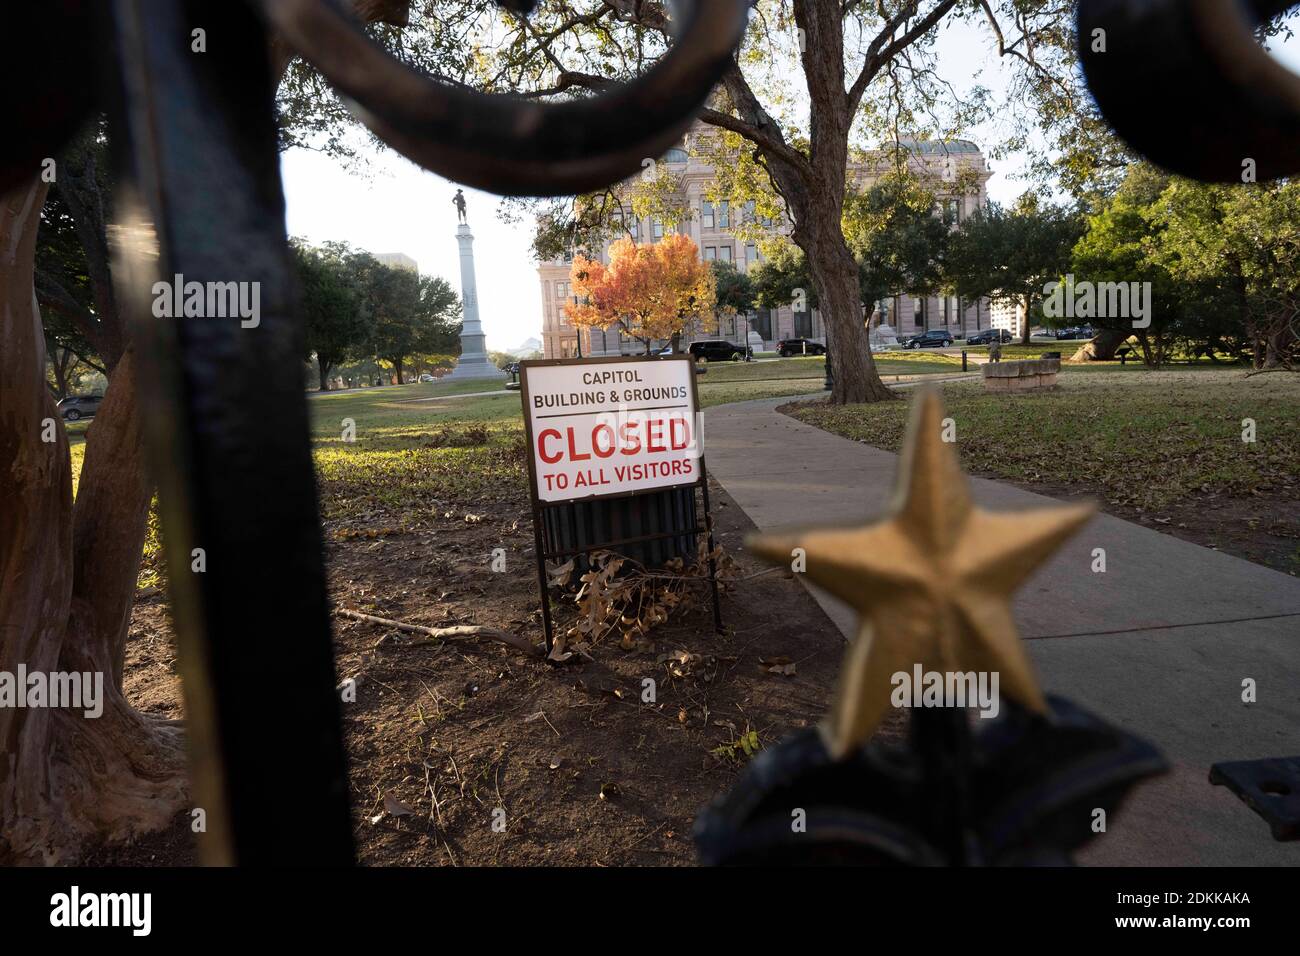 Austin, TX USA December 15, 2020: Sign reading 'Capitol Building and Grounds CLOSED to all visitors'  sits behind the locked gates of the Texas Capitol in Austin the evening before Texas Governor Greg Abbott ordered the grounds reopened to the public. The Capitol has been closed for months following vandalism to the grounds and building during protests against police violence after the murder of George Floyd in May, 2020. Credit: Bob Daemmrich/Alamy Live News Stock Photo